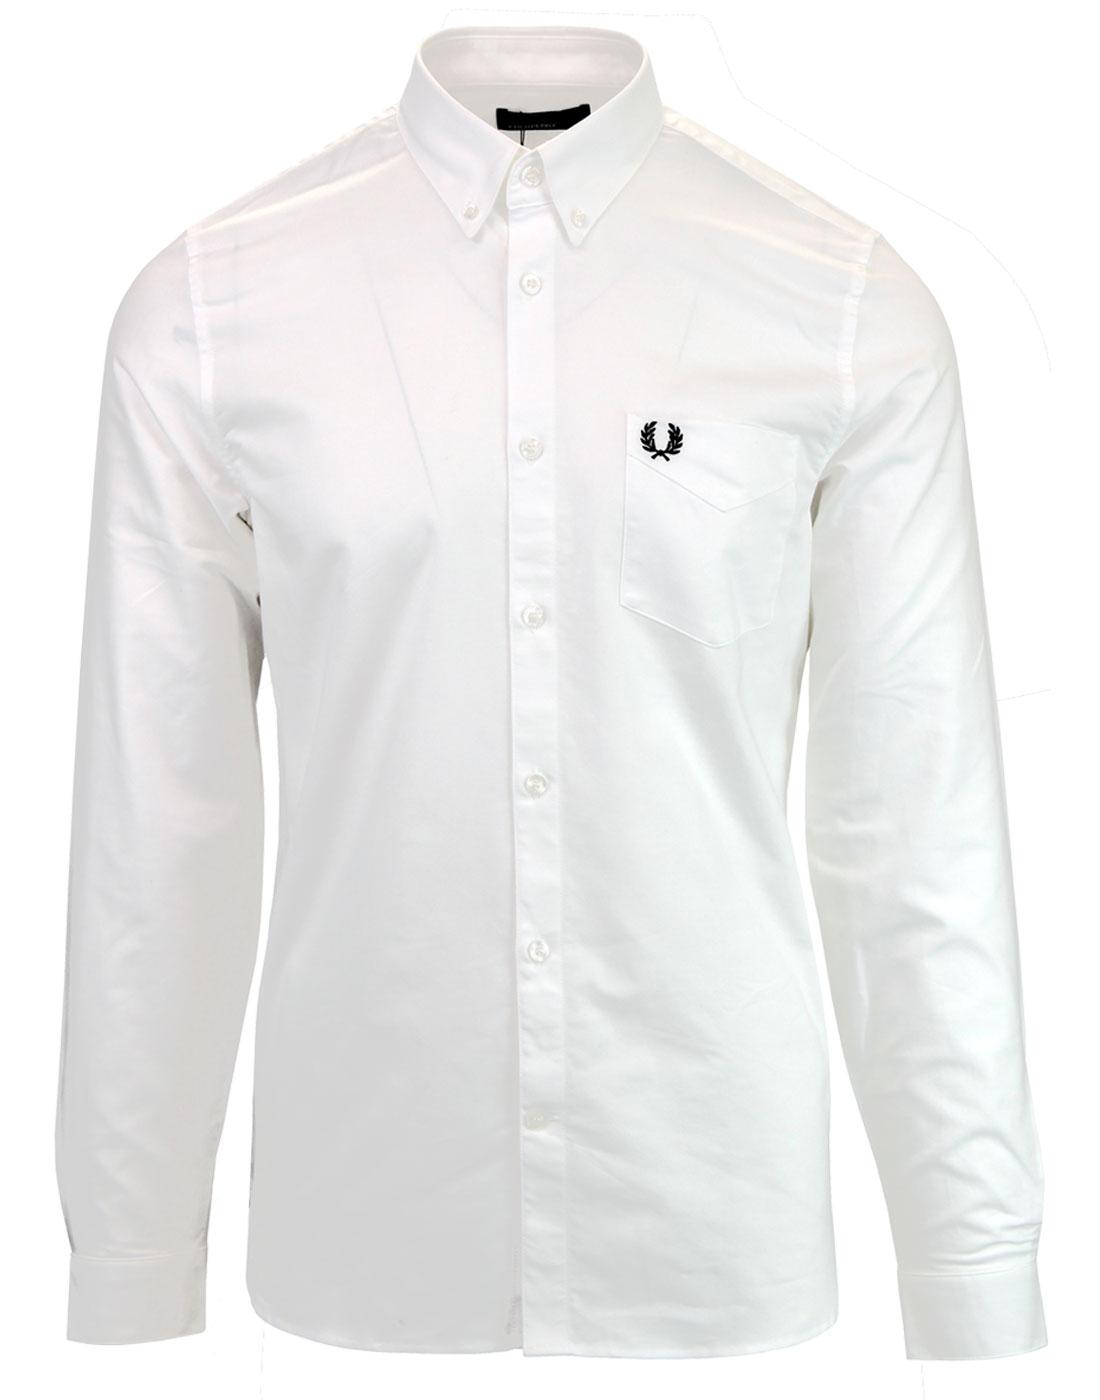 FRED PERRY Retro Mod Indie Oxford Shirt in White